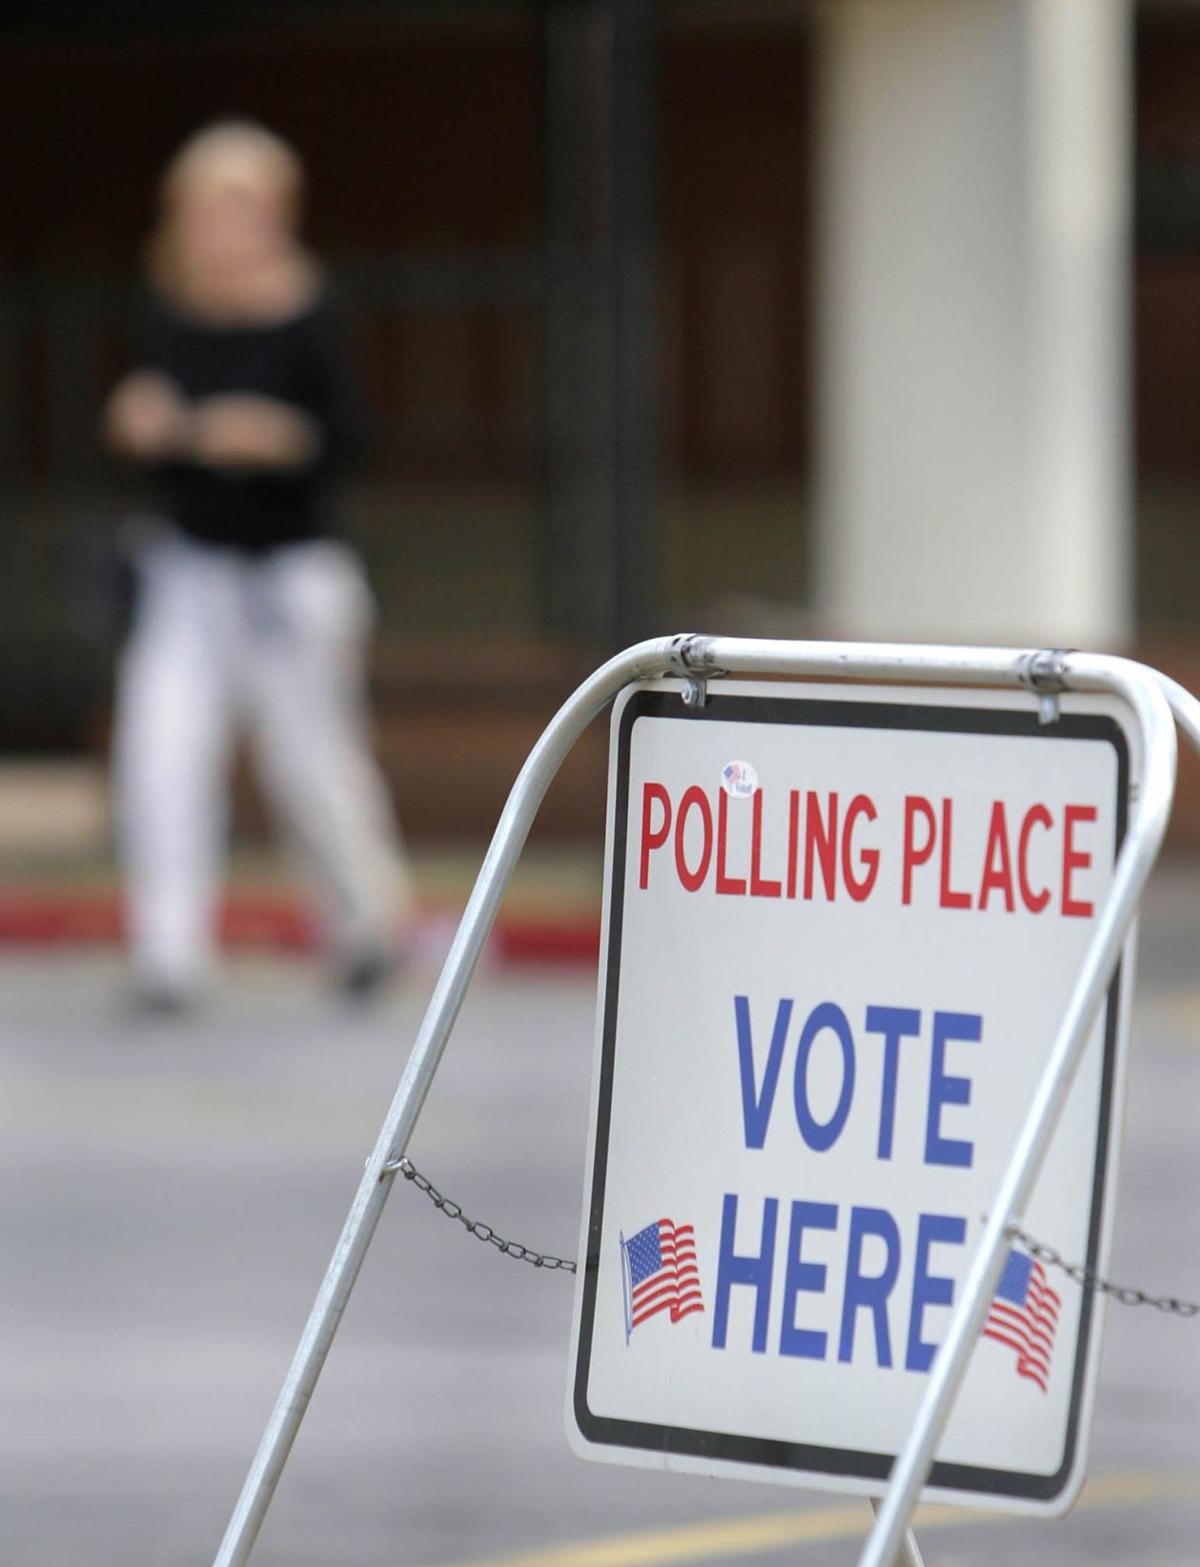 Tuesday's elections include several area city council seats, Tulsa school board race ...